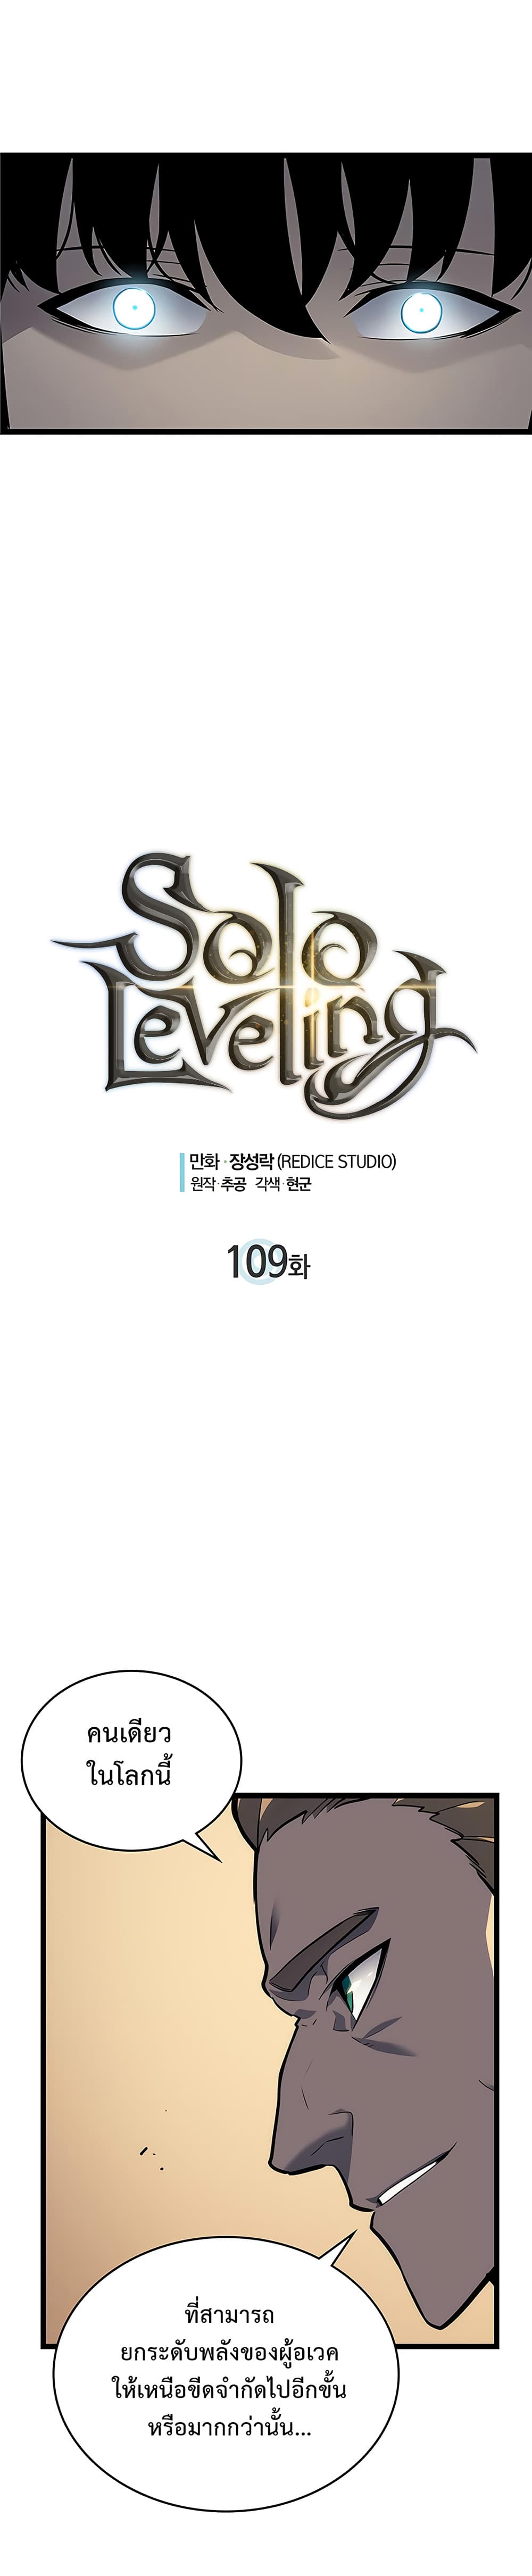 Solo Leveling 109 (3)